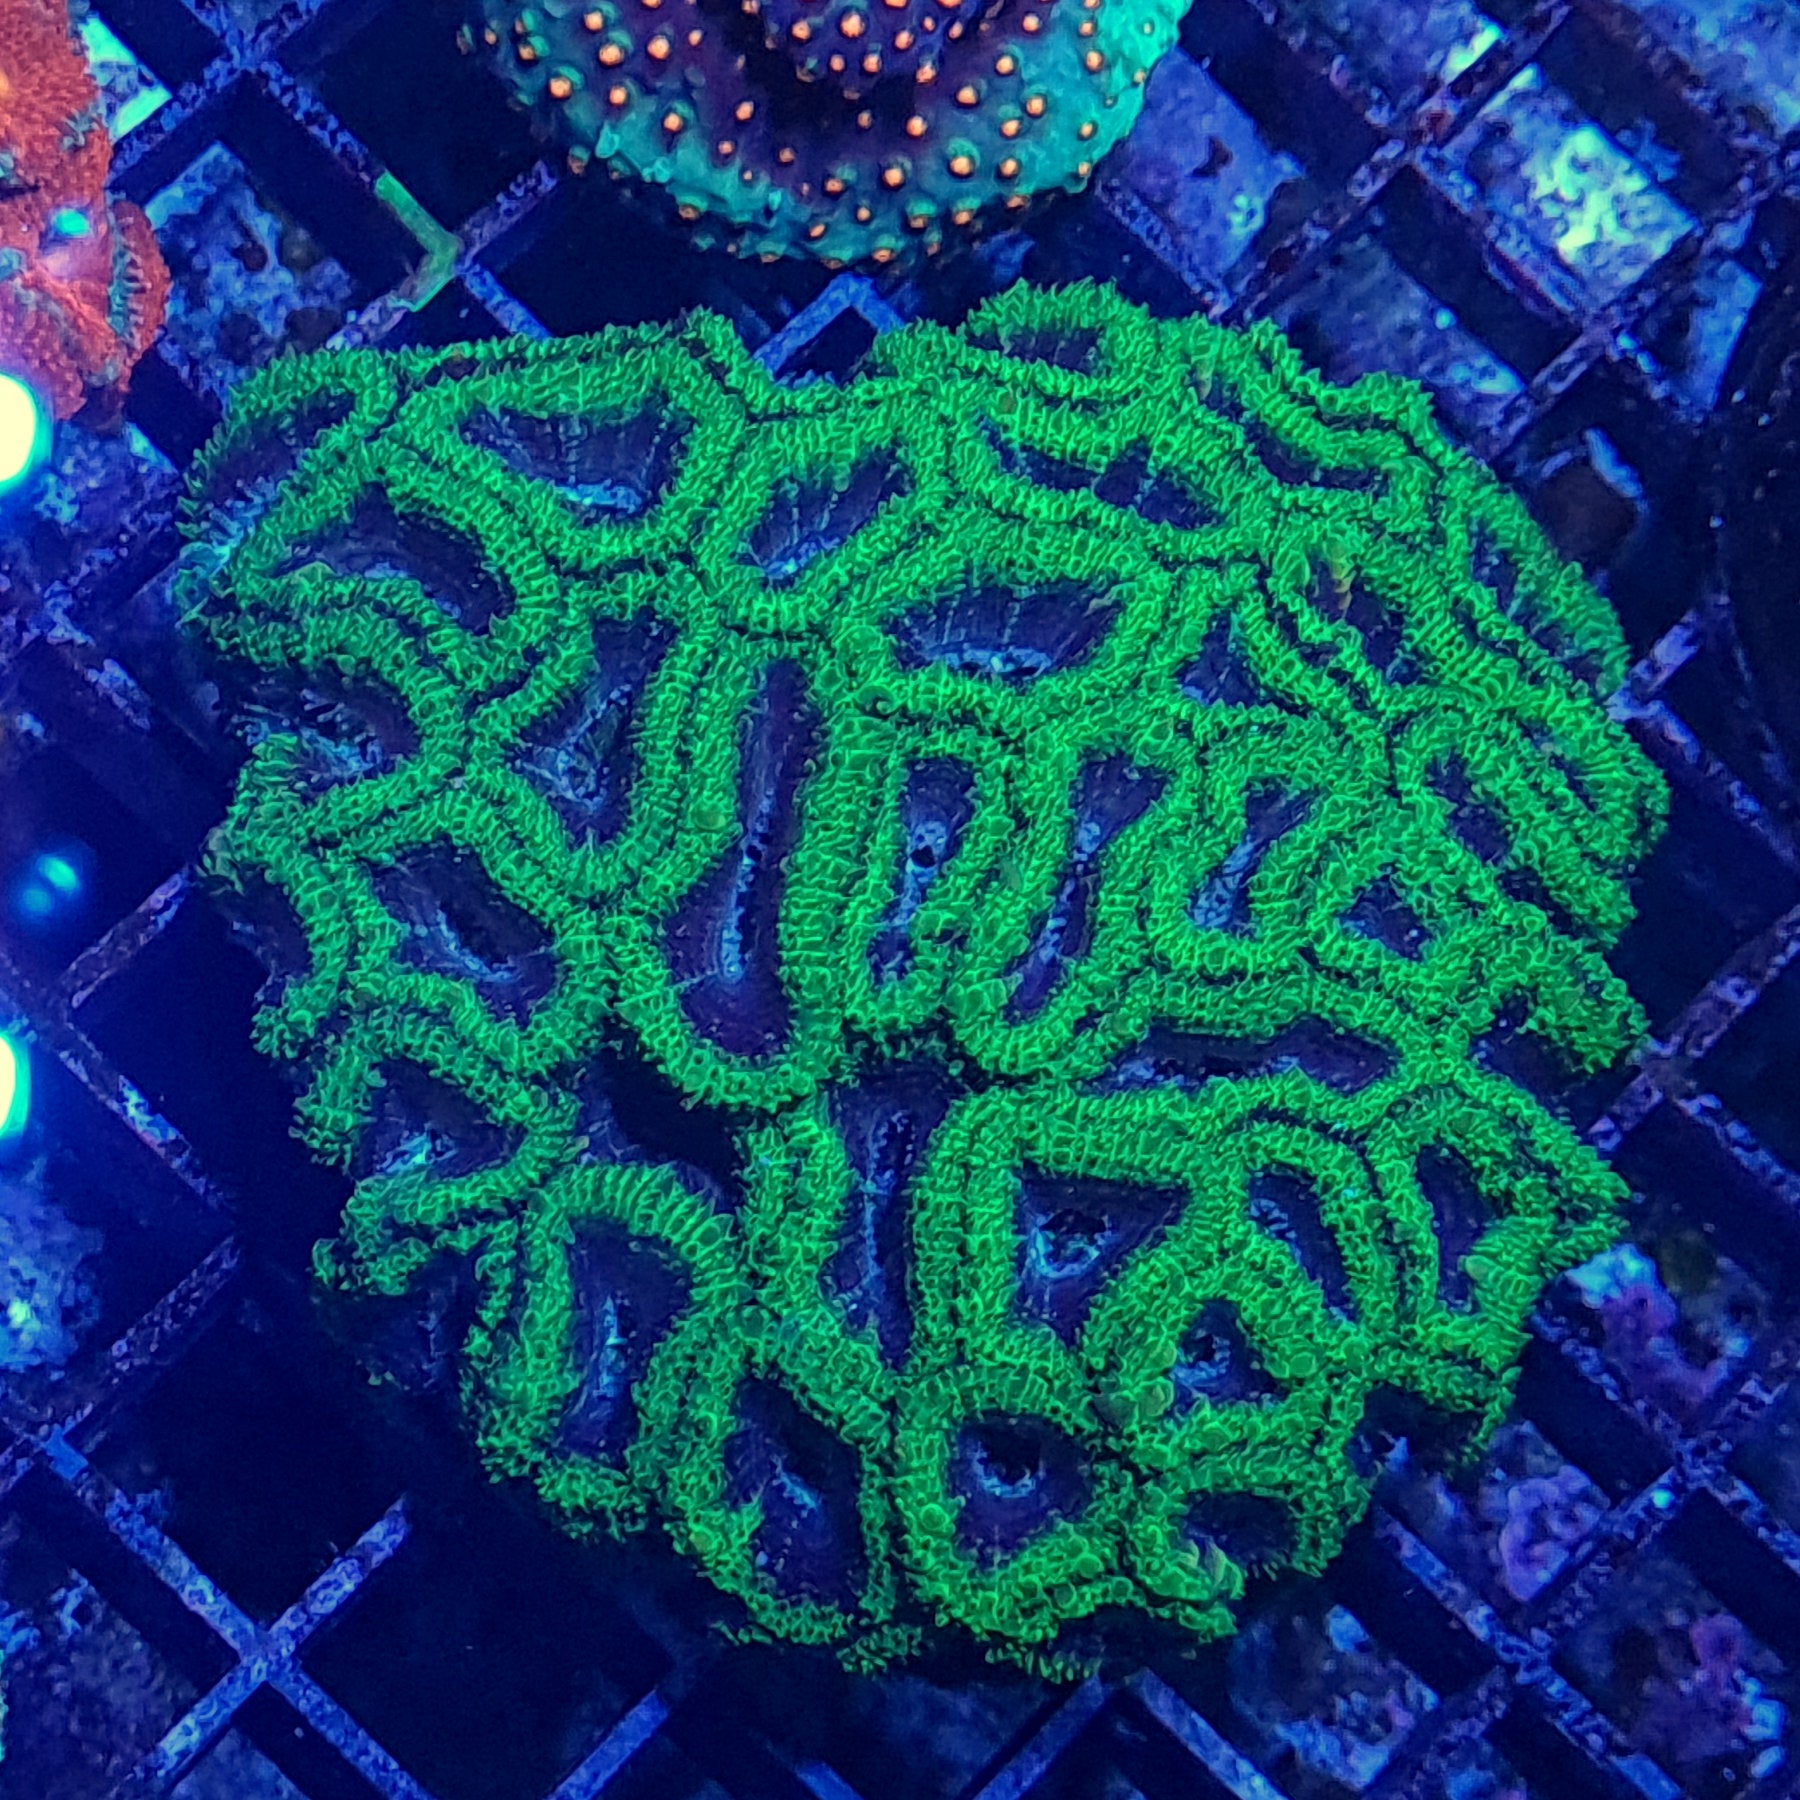 Large Green / Purple Acan Lord LPS Coral (Micromussa lordhowensis ...